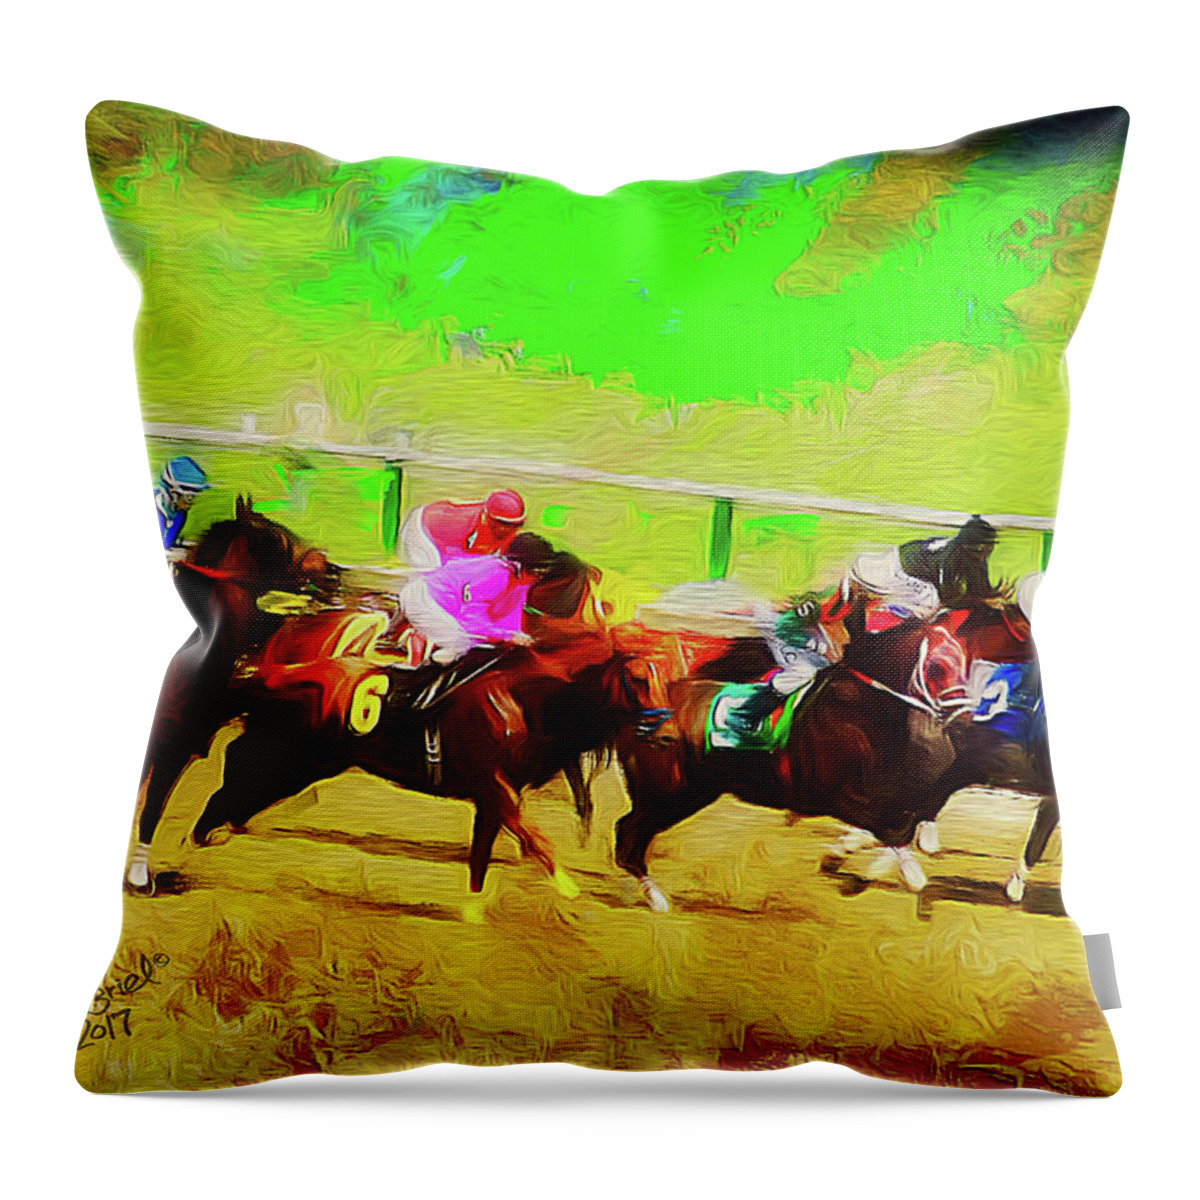 Kentucky Derby Throw Pillow featuring the digital art Sport Of Kings by Ted Azriel